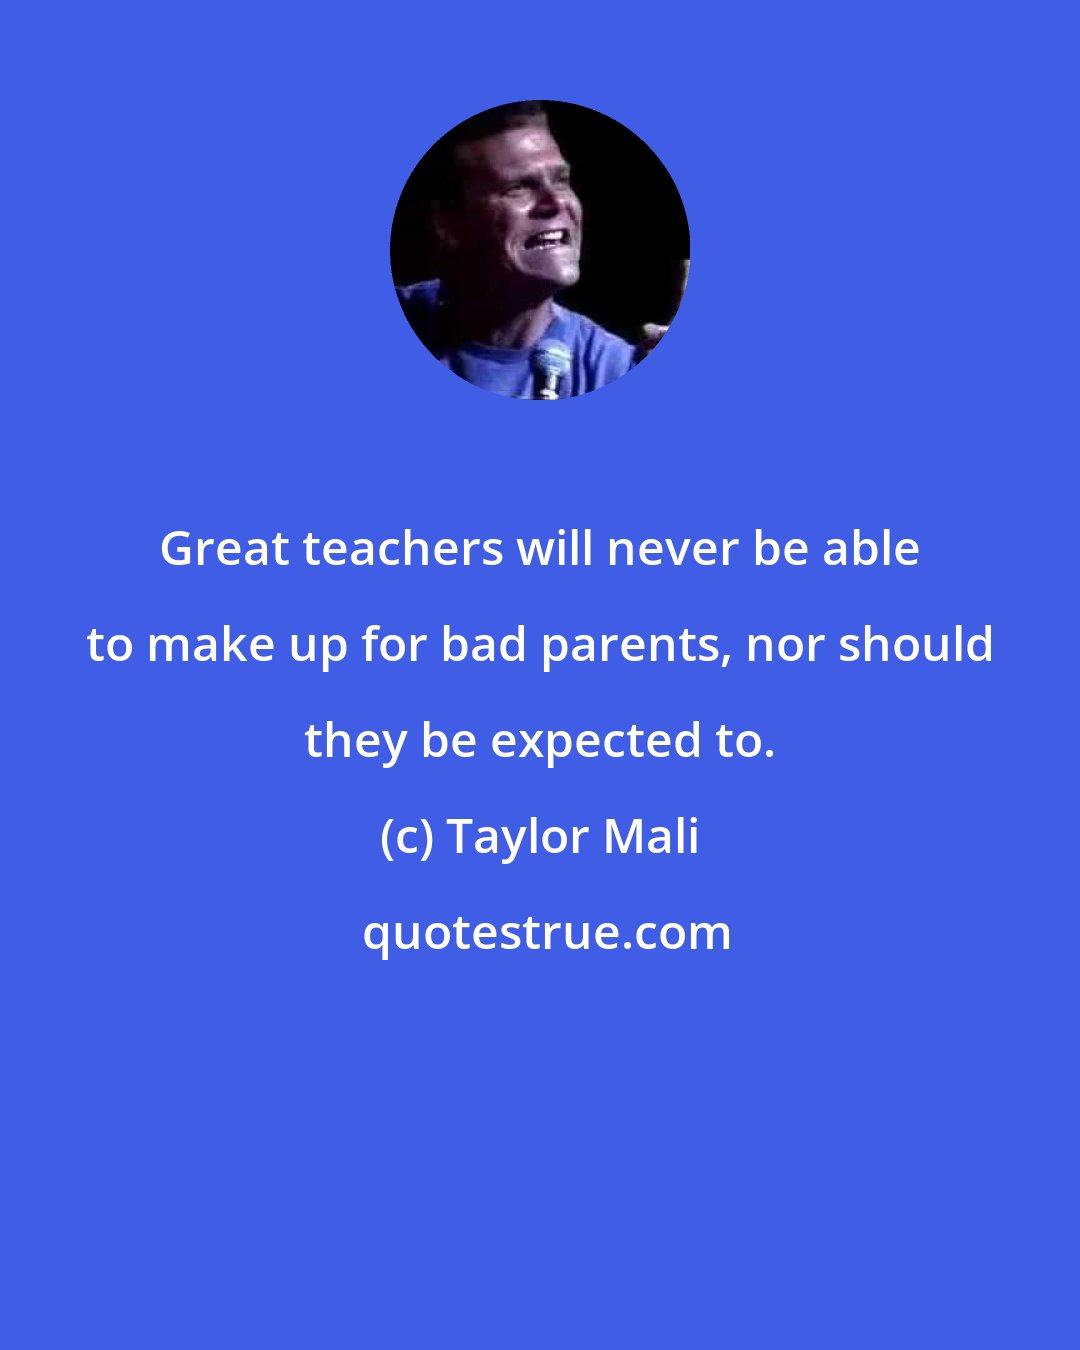 Taylor Mali: Great teachers will never be able to make up for bad parents, nor should they be expected to.